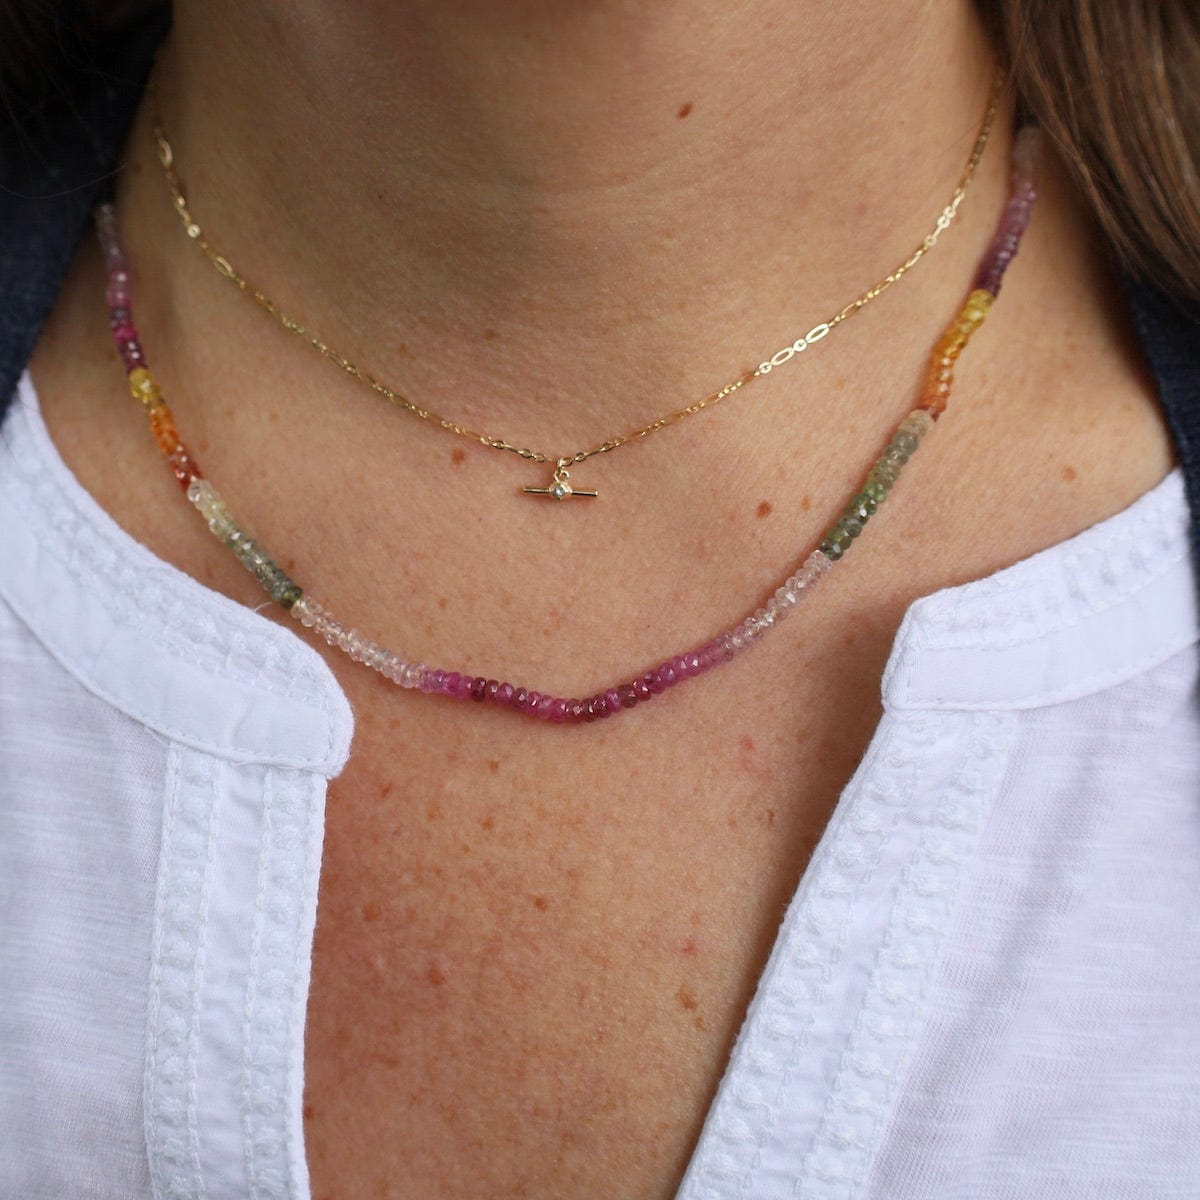 Short T-bar necklace with gold chain